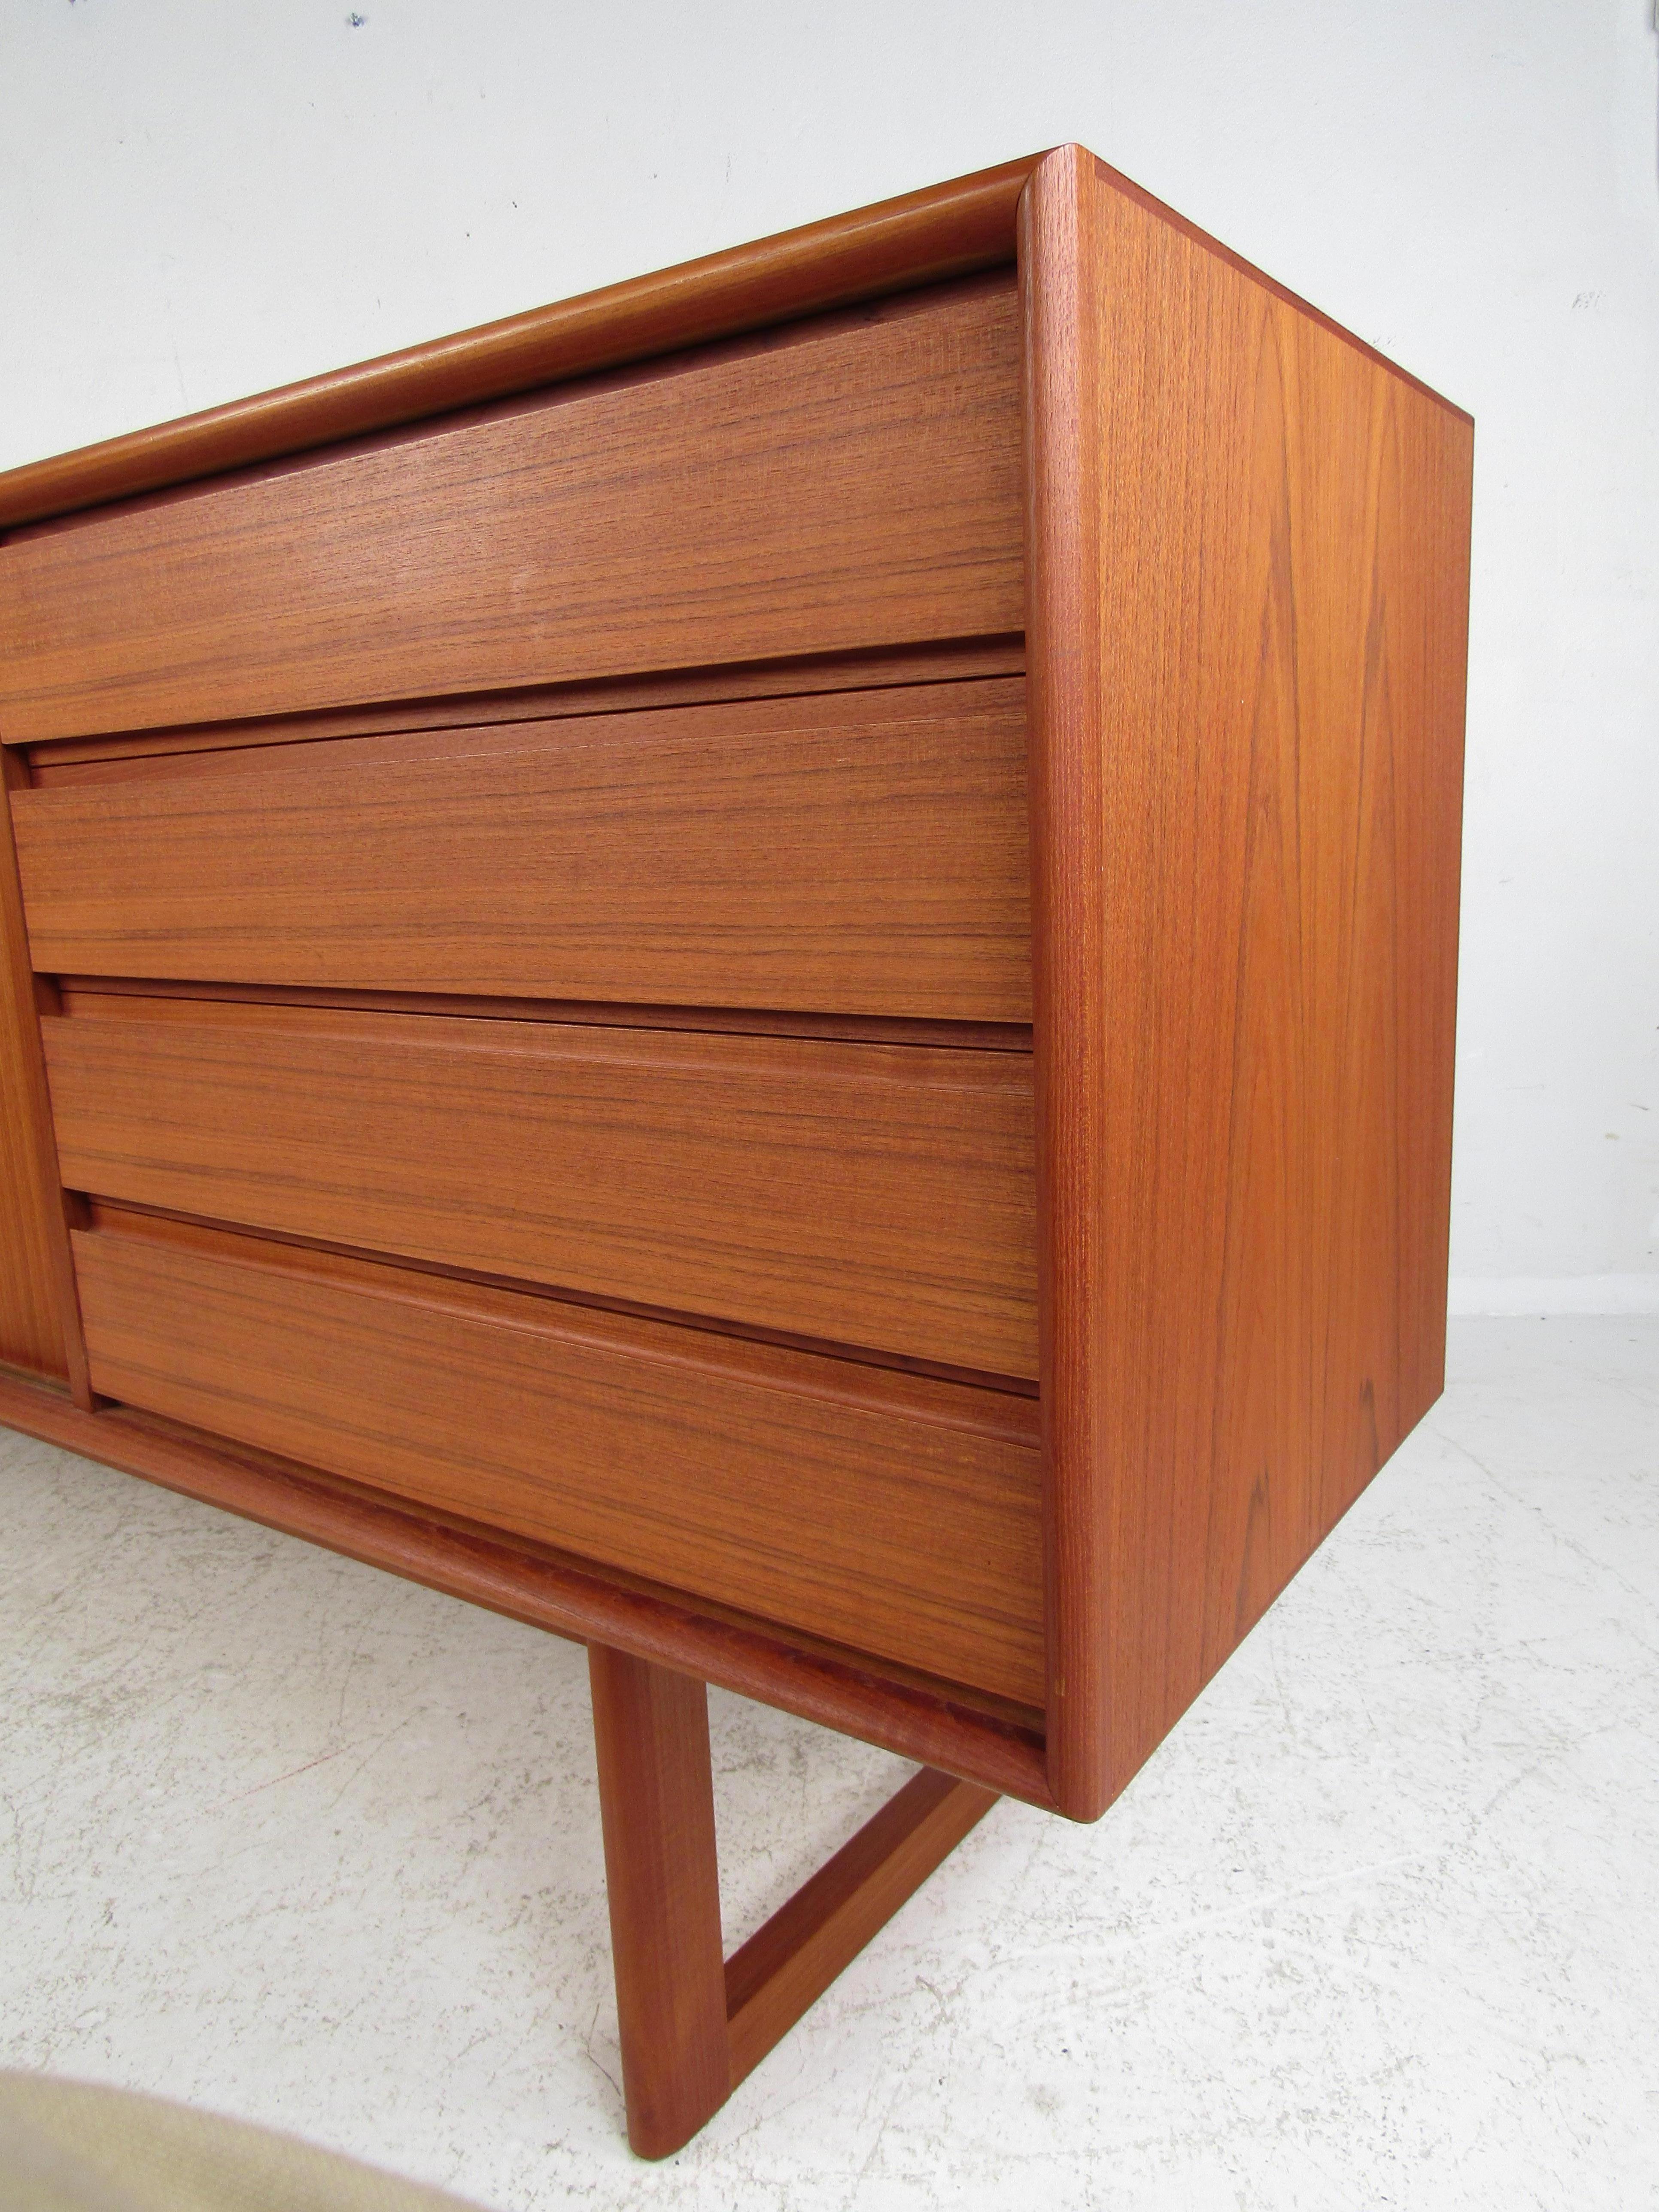 Beautifully constructed Danish teak credenza with four drawers and two sliding door storage compartments with adjustable shelves. Clean, understated, design details add versatility to a variety of applications such as an office credenza, dining room